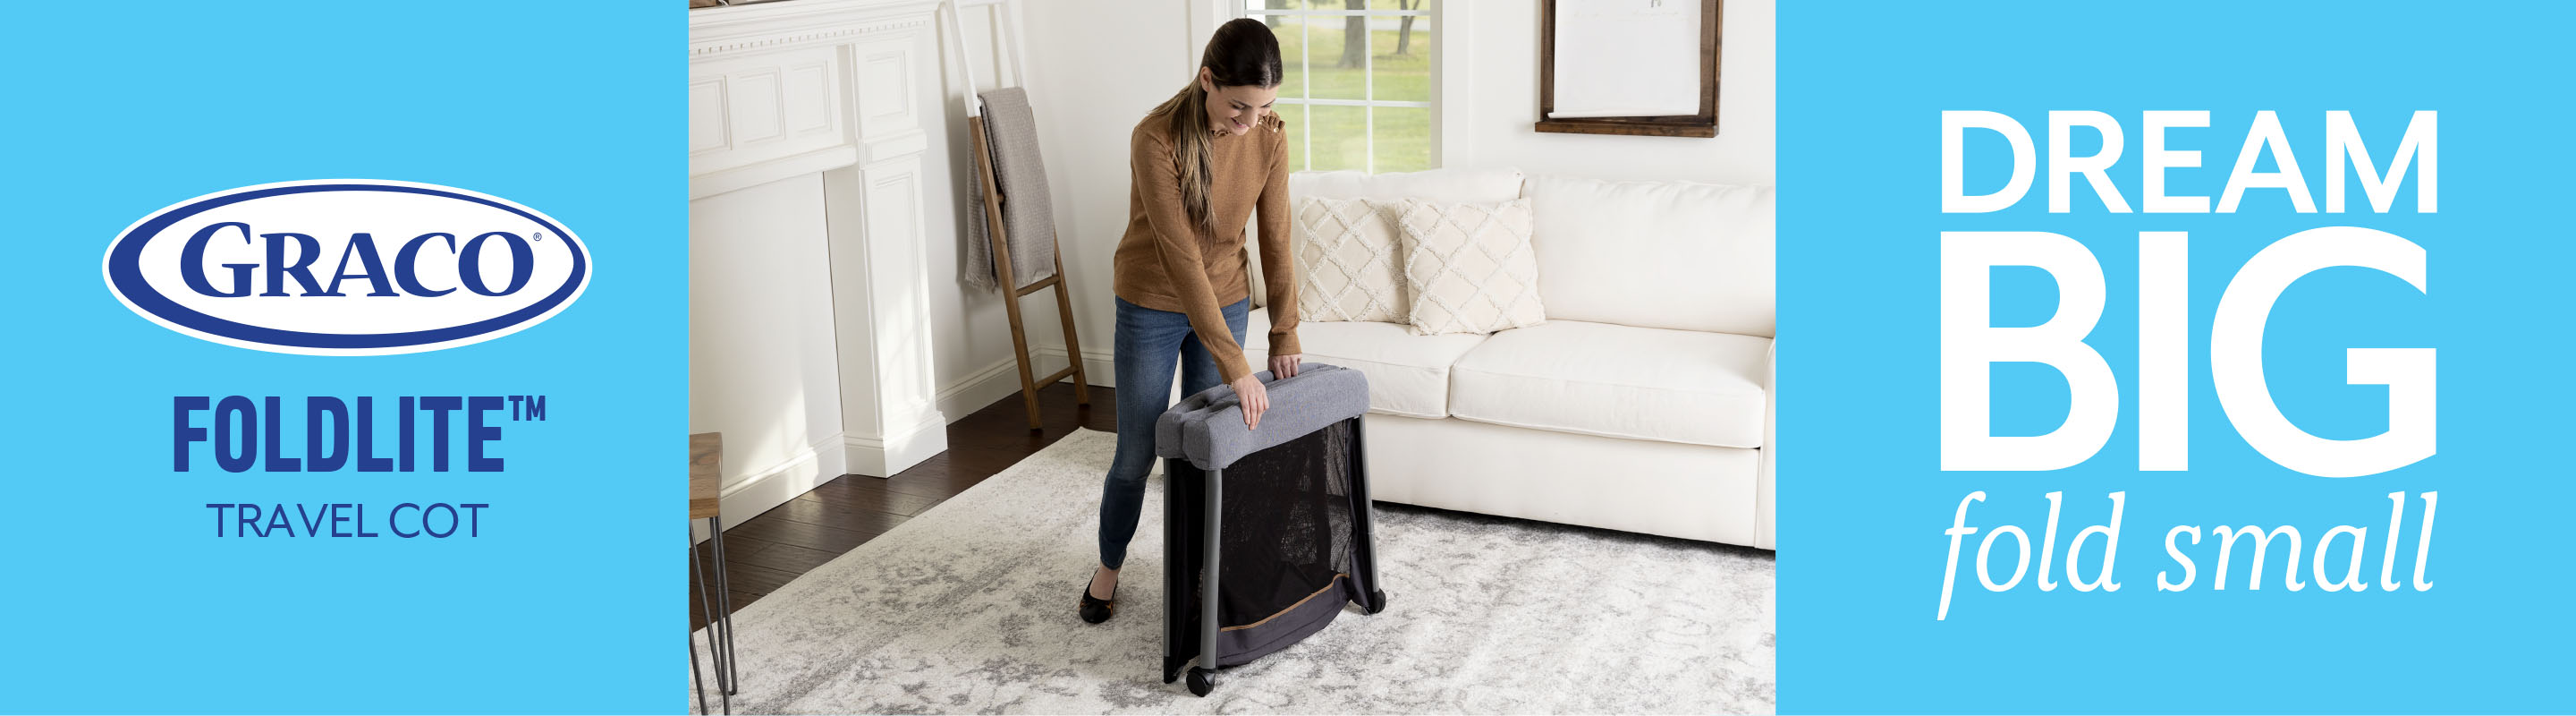 Woman compactly folding FoldLite travel cot in her living room.